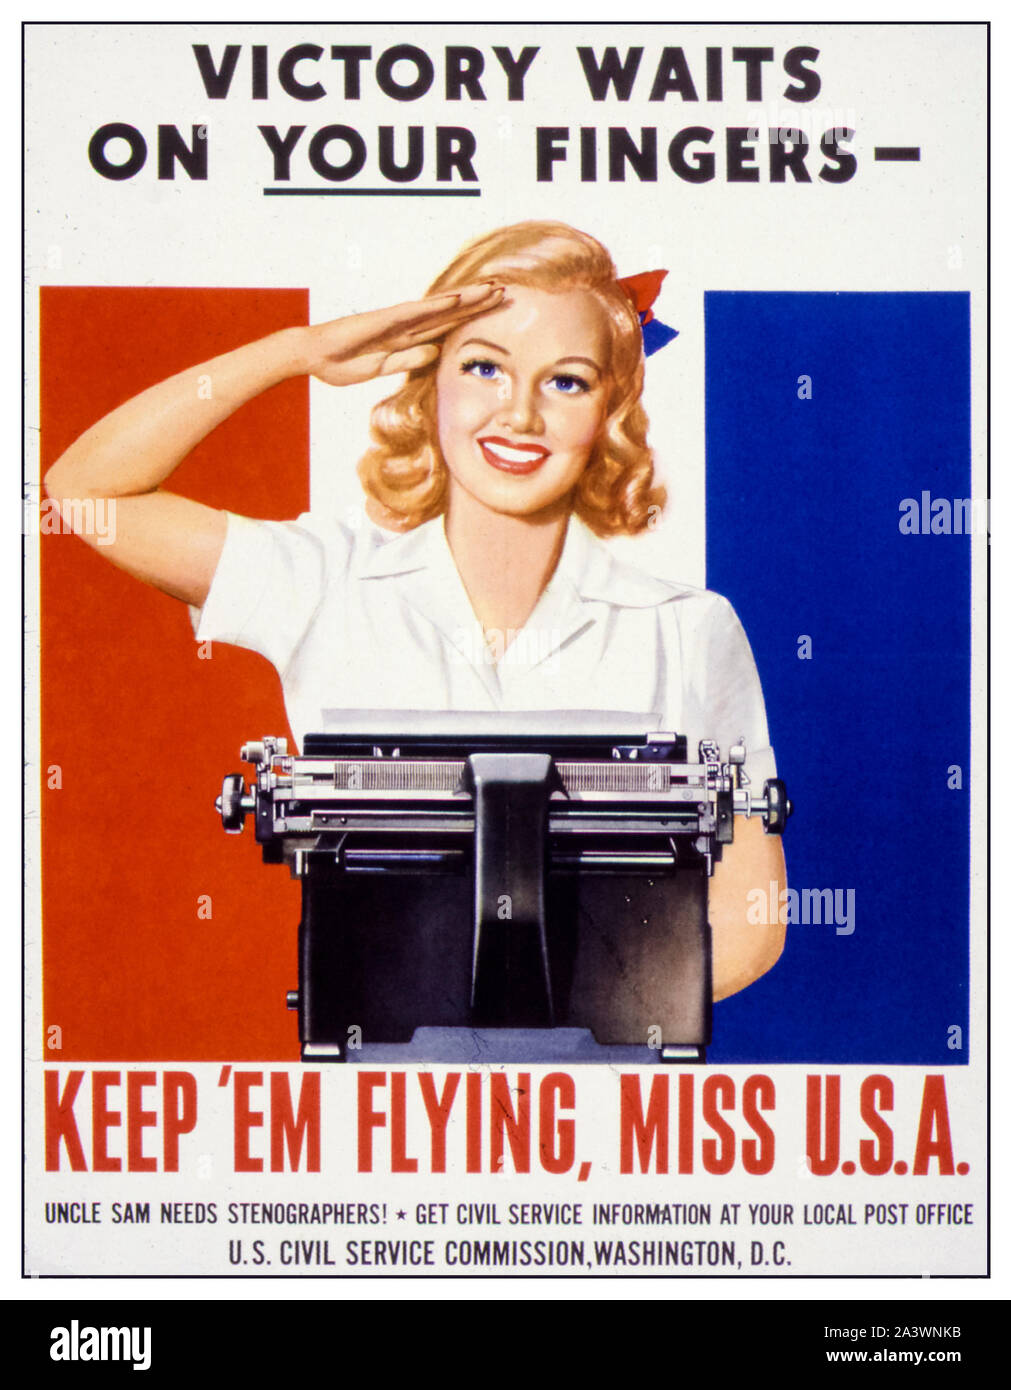 American, US, WW2, Female secretary recruitment poster, Victory Waits On Your Fingers, Keep 'Em Flying Miss USA, (woman behind typewriter), 1941-1945 Stock Photo